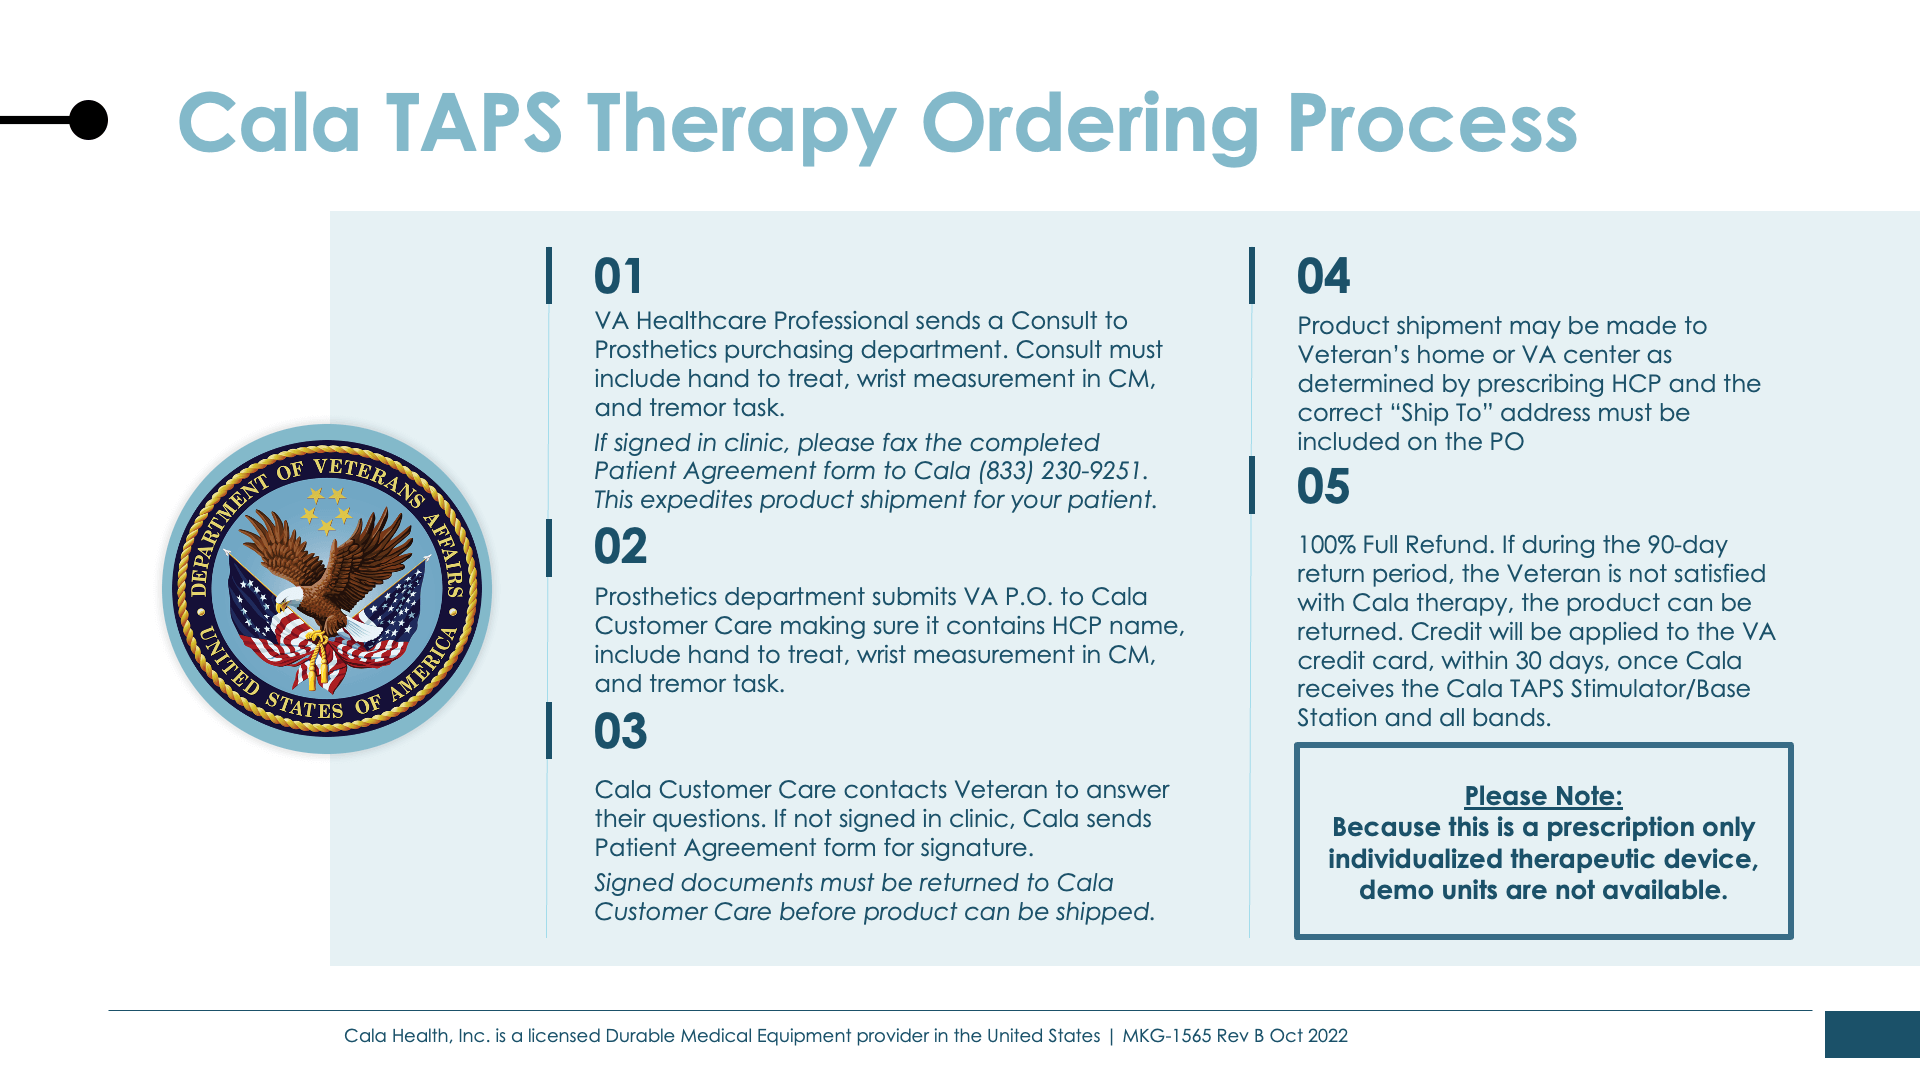 Cala TAPS Therapy Ordering Process